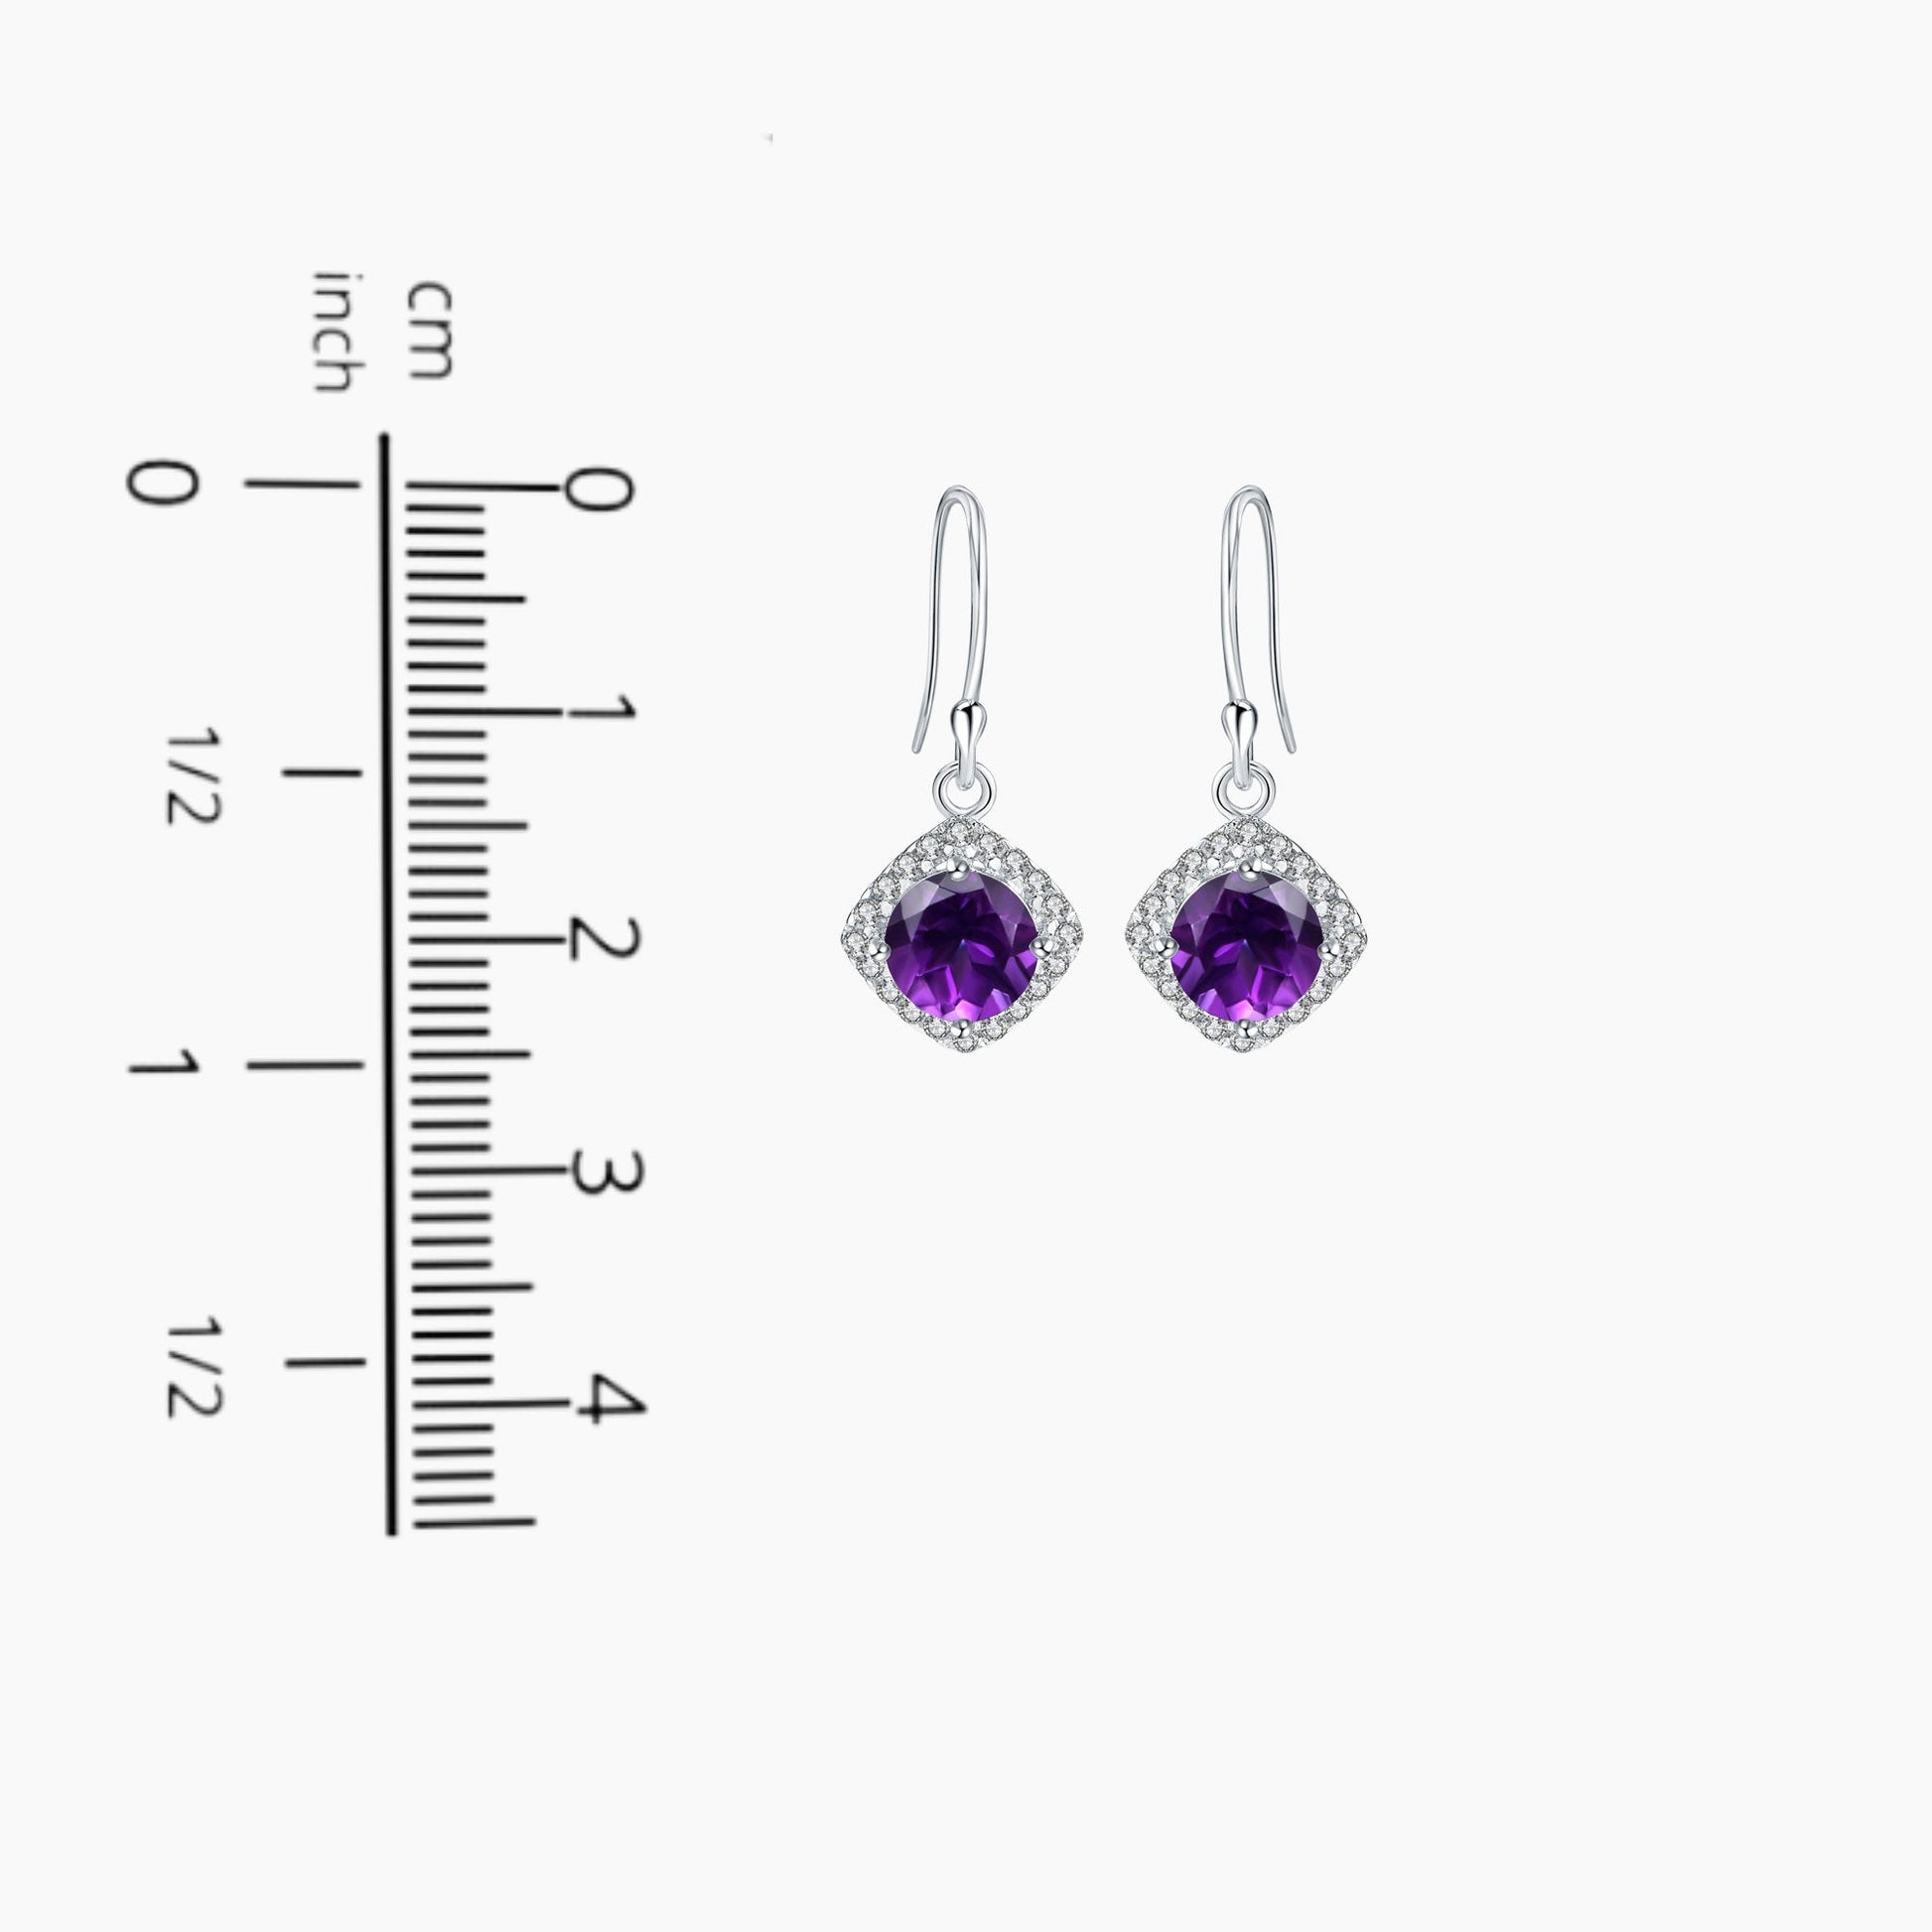 Amethyst Round Cut Drop Earrings displayed on a scale to illustrate their size and dimensions accurately.